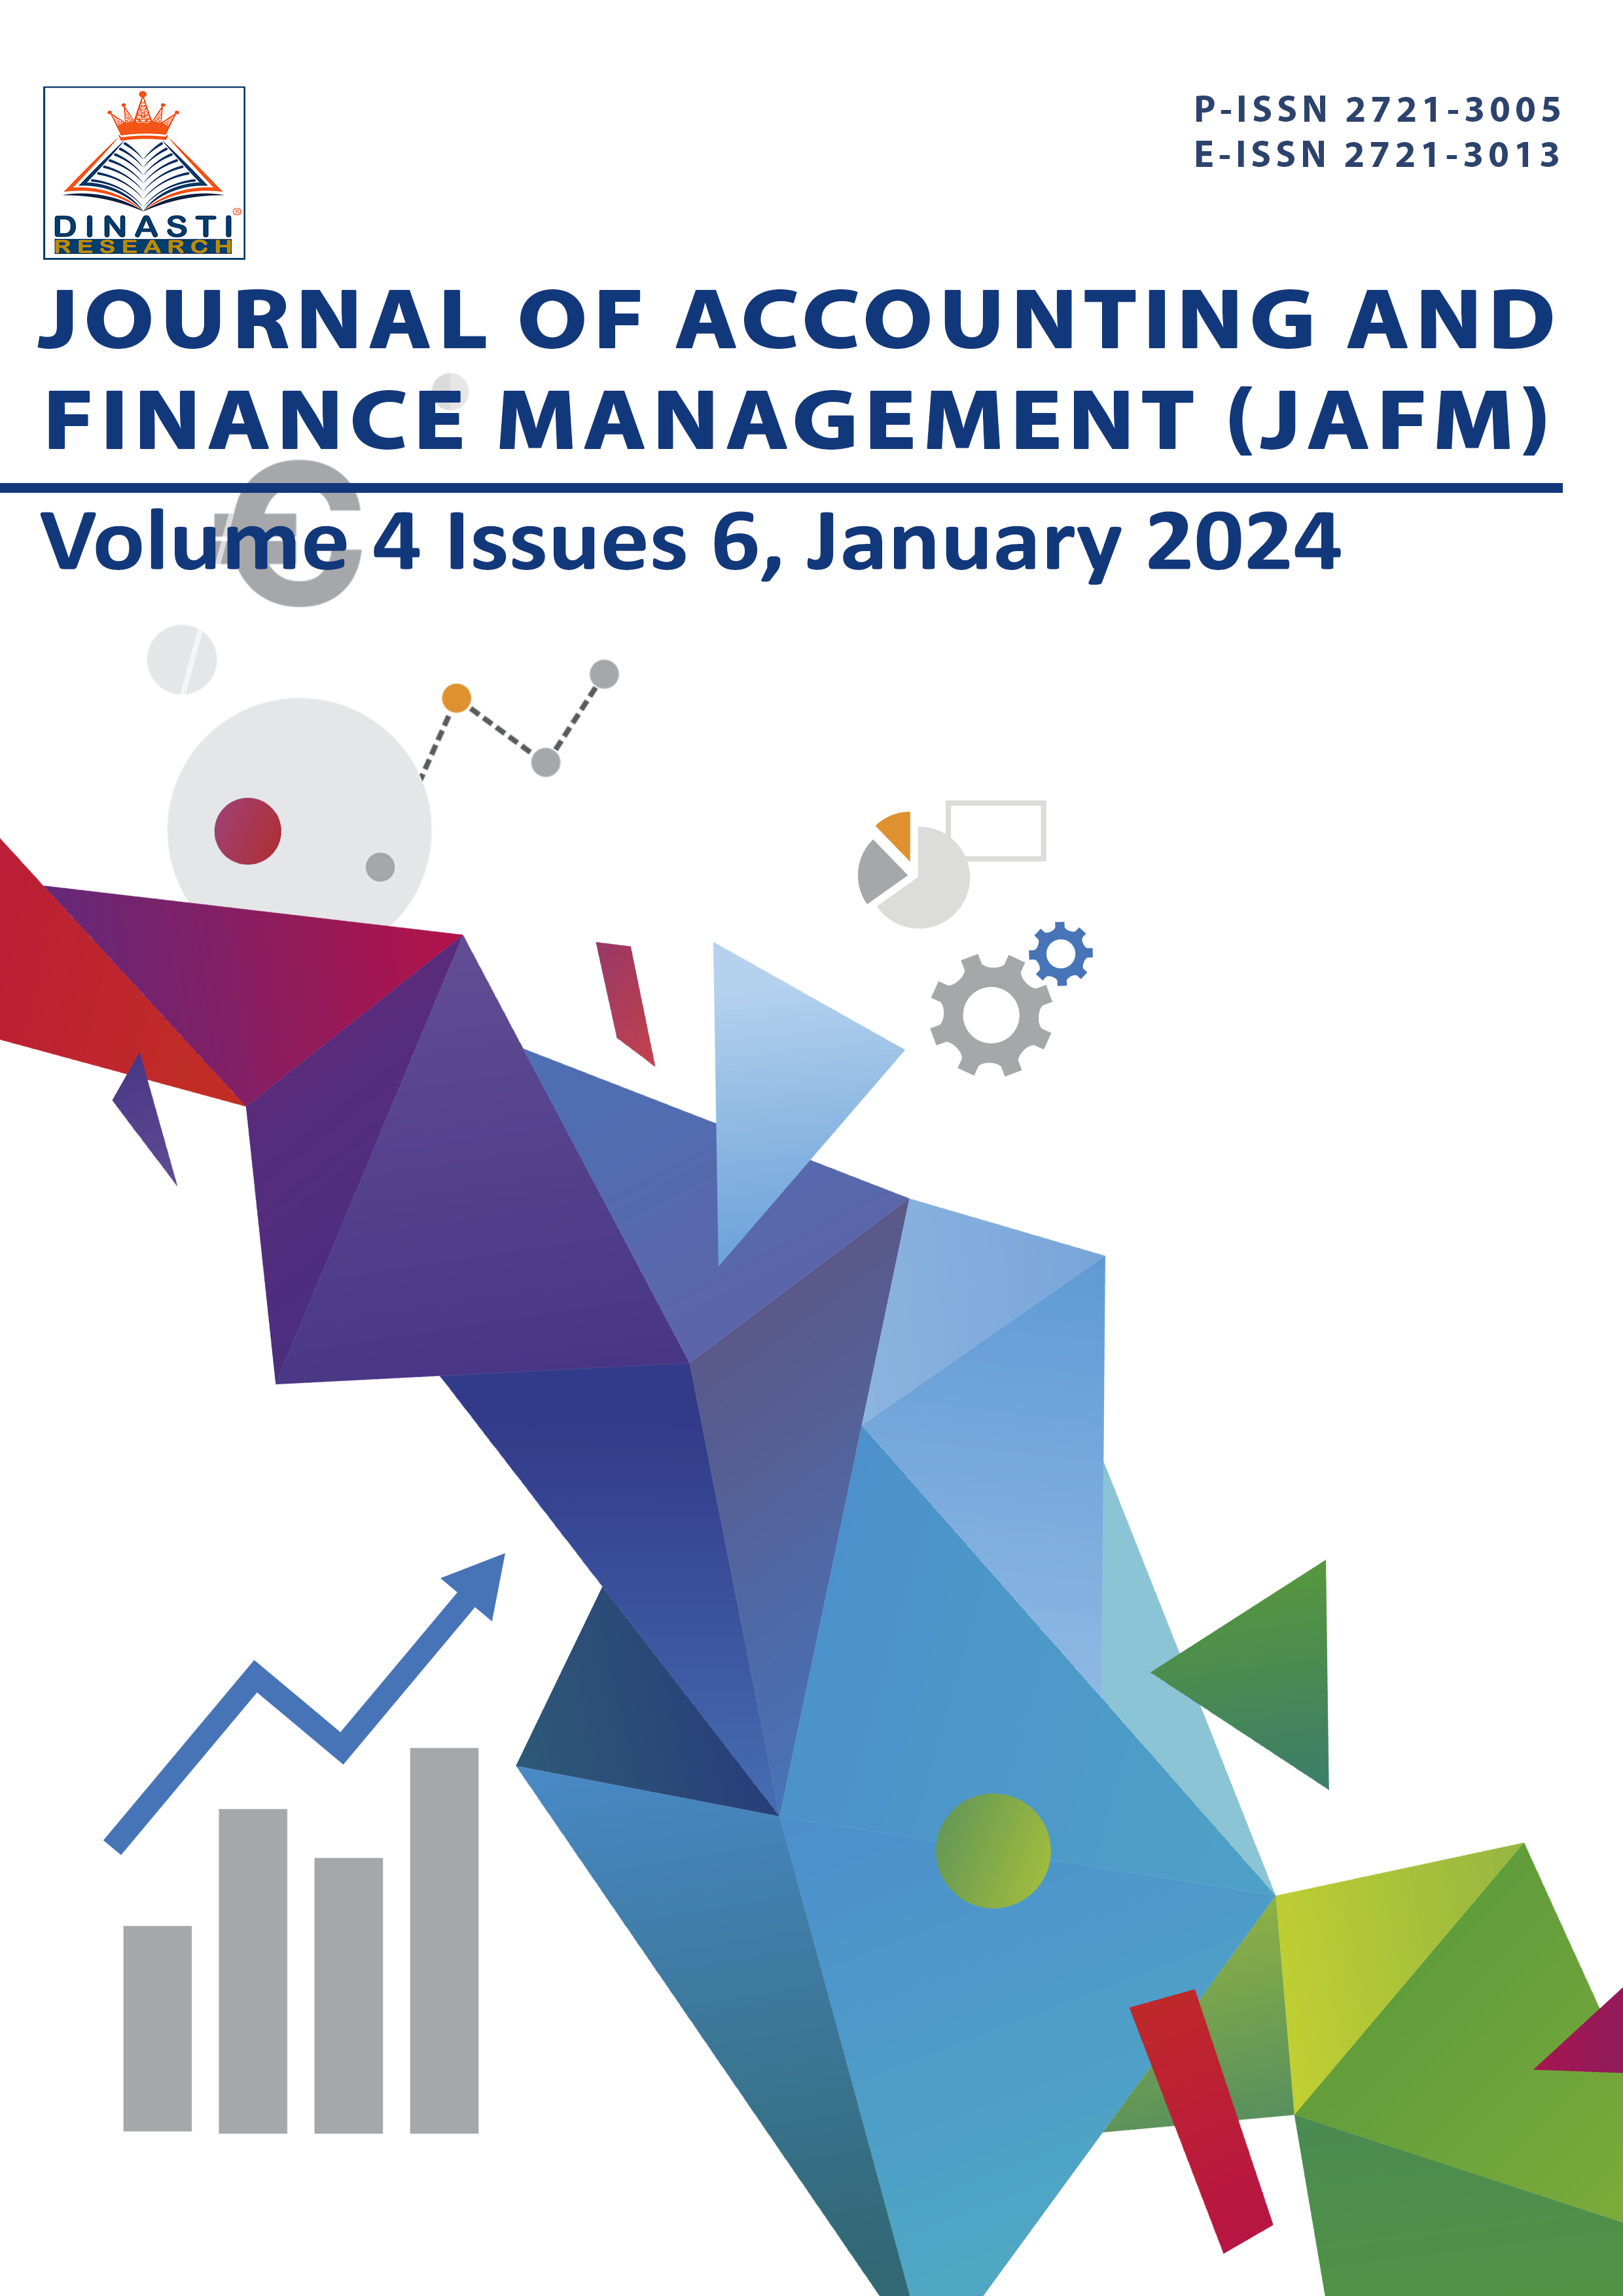 					View Vol. 4 No. 6 (2023): Journal of Accounting and Finance Management (January - February 2024)
				